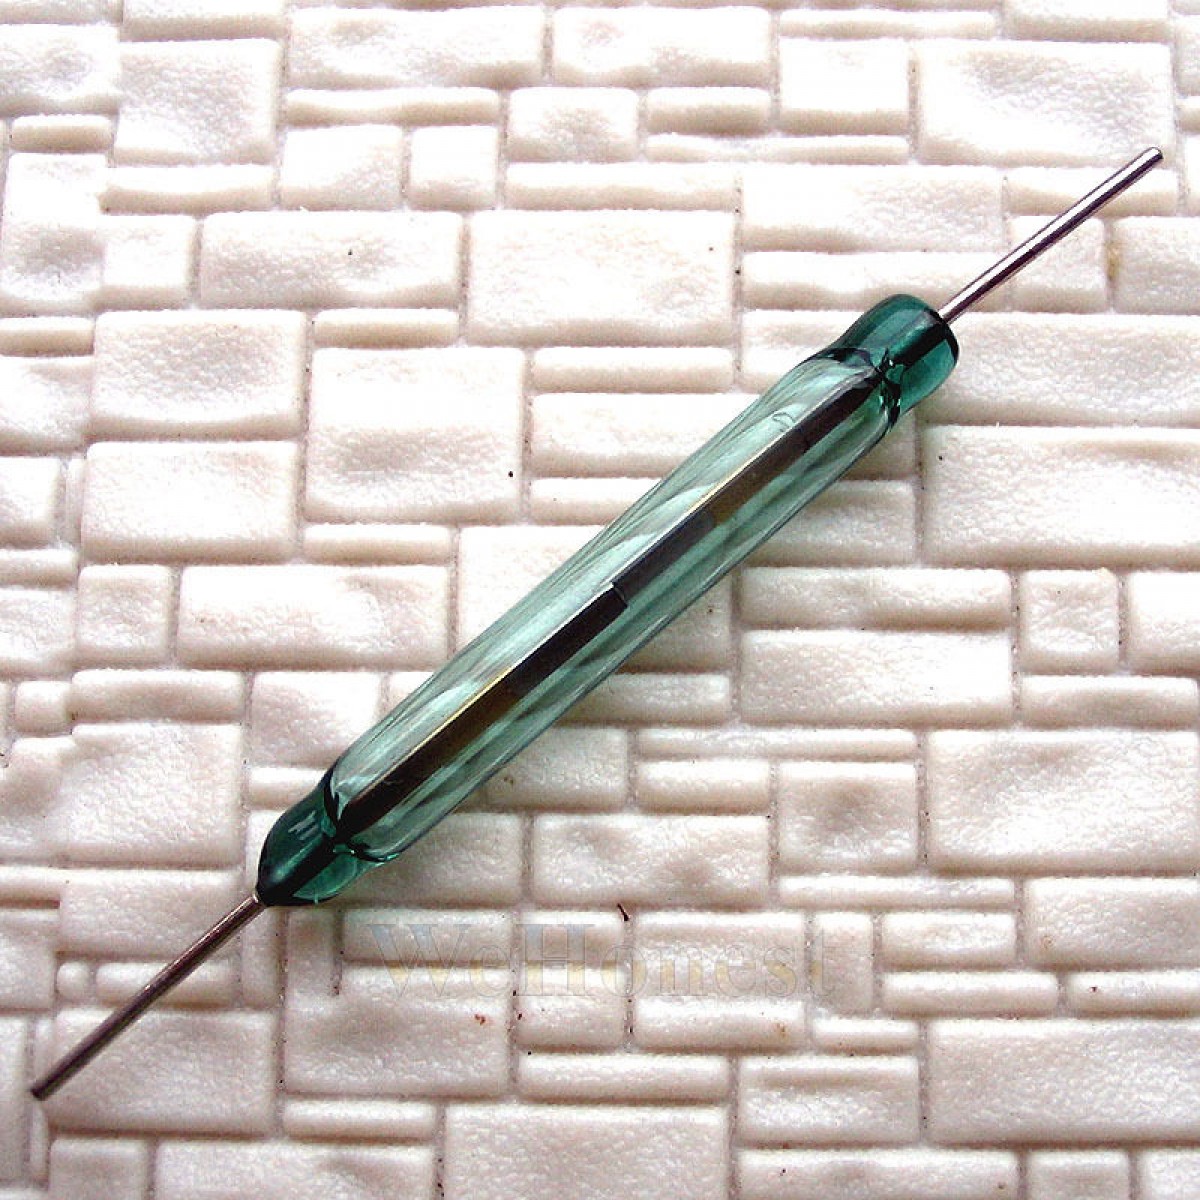       10 pcs Reed Switches with 1 Magnetspcs   Reed Switches with 1 Magnets